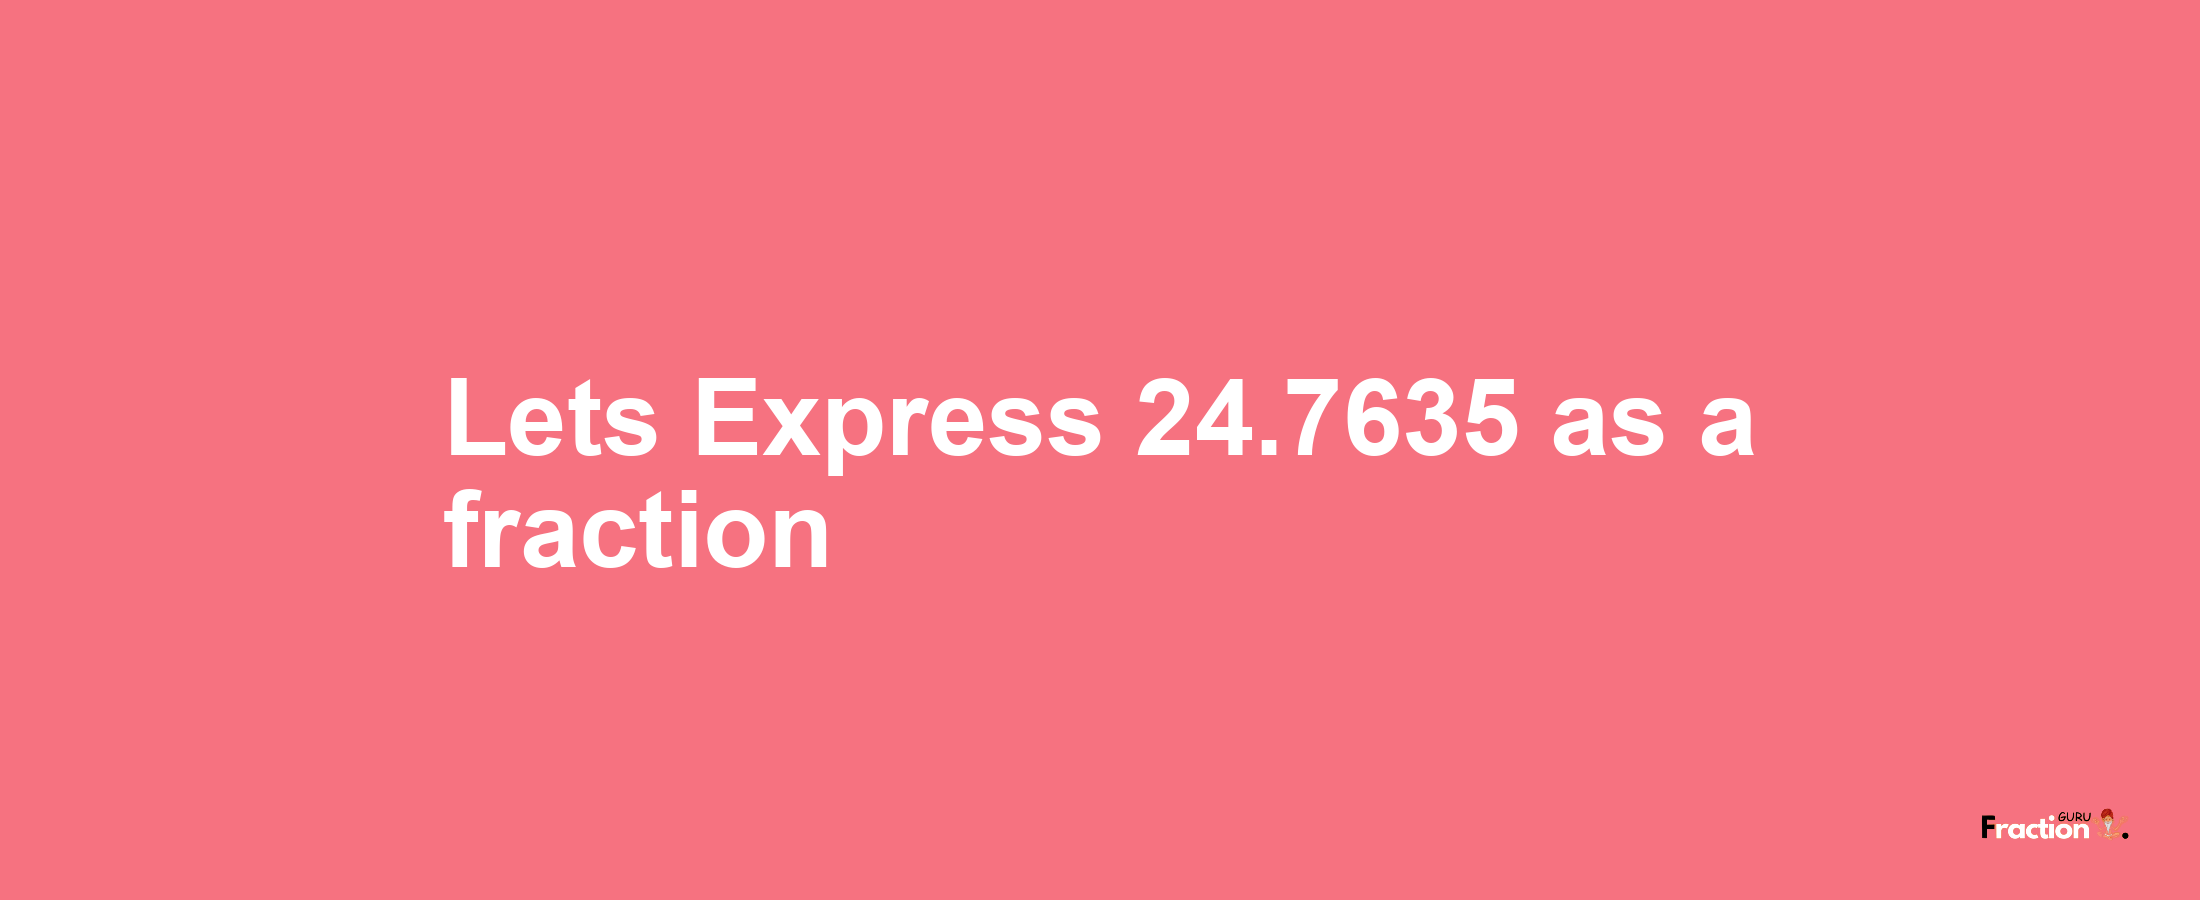 Lets Express 24.7635 as afraction